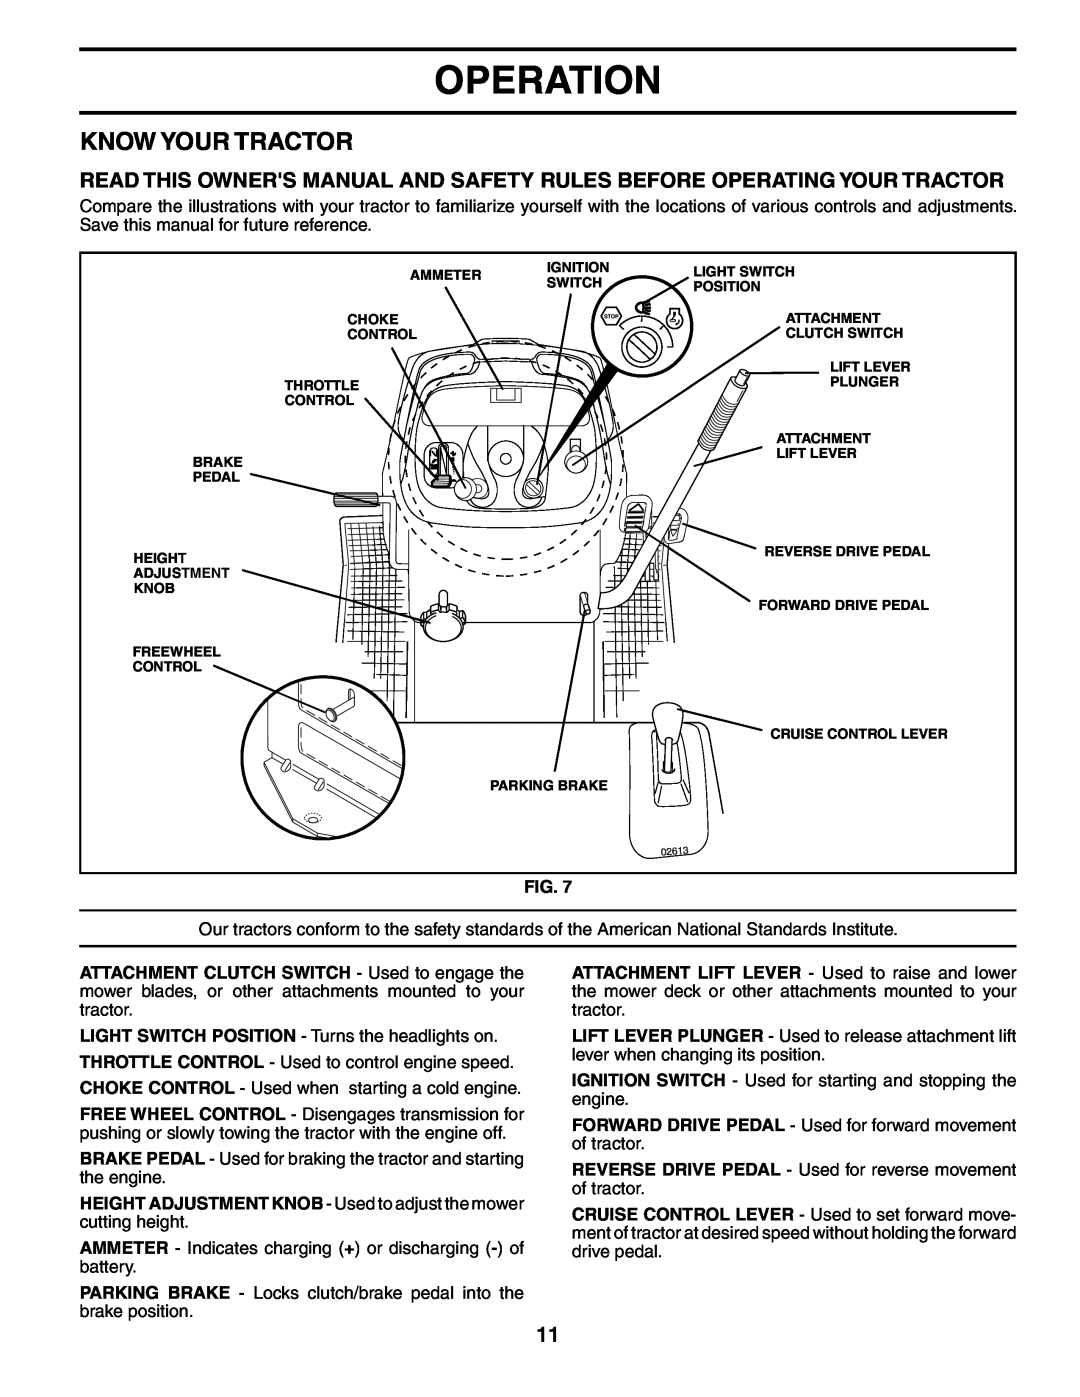 Poulan 185498, 954569516 Know Your Tractor, Operation, HEIGHT ADJUSTMENT KNOB - Used to adjust the mower cutting height 